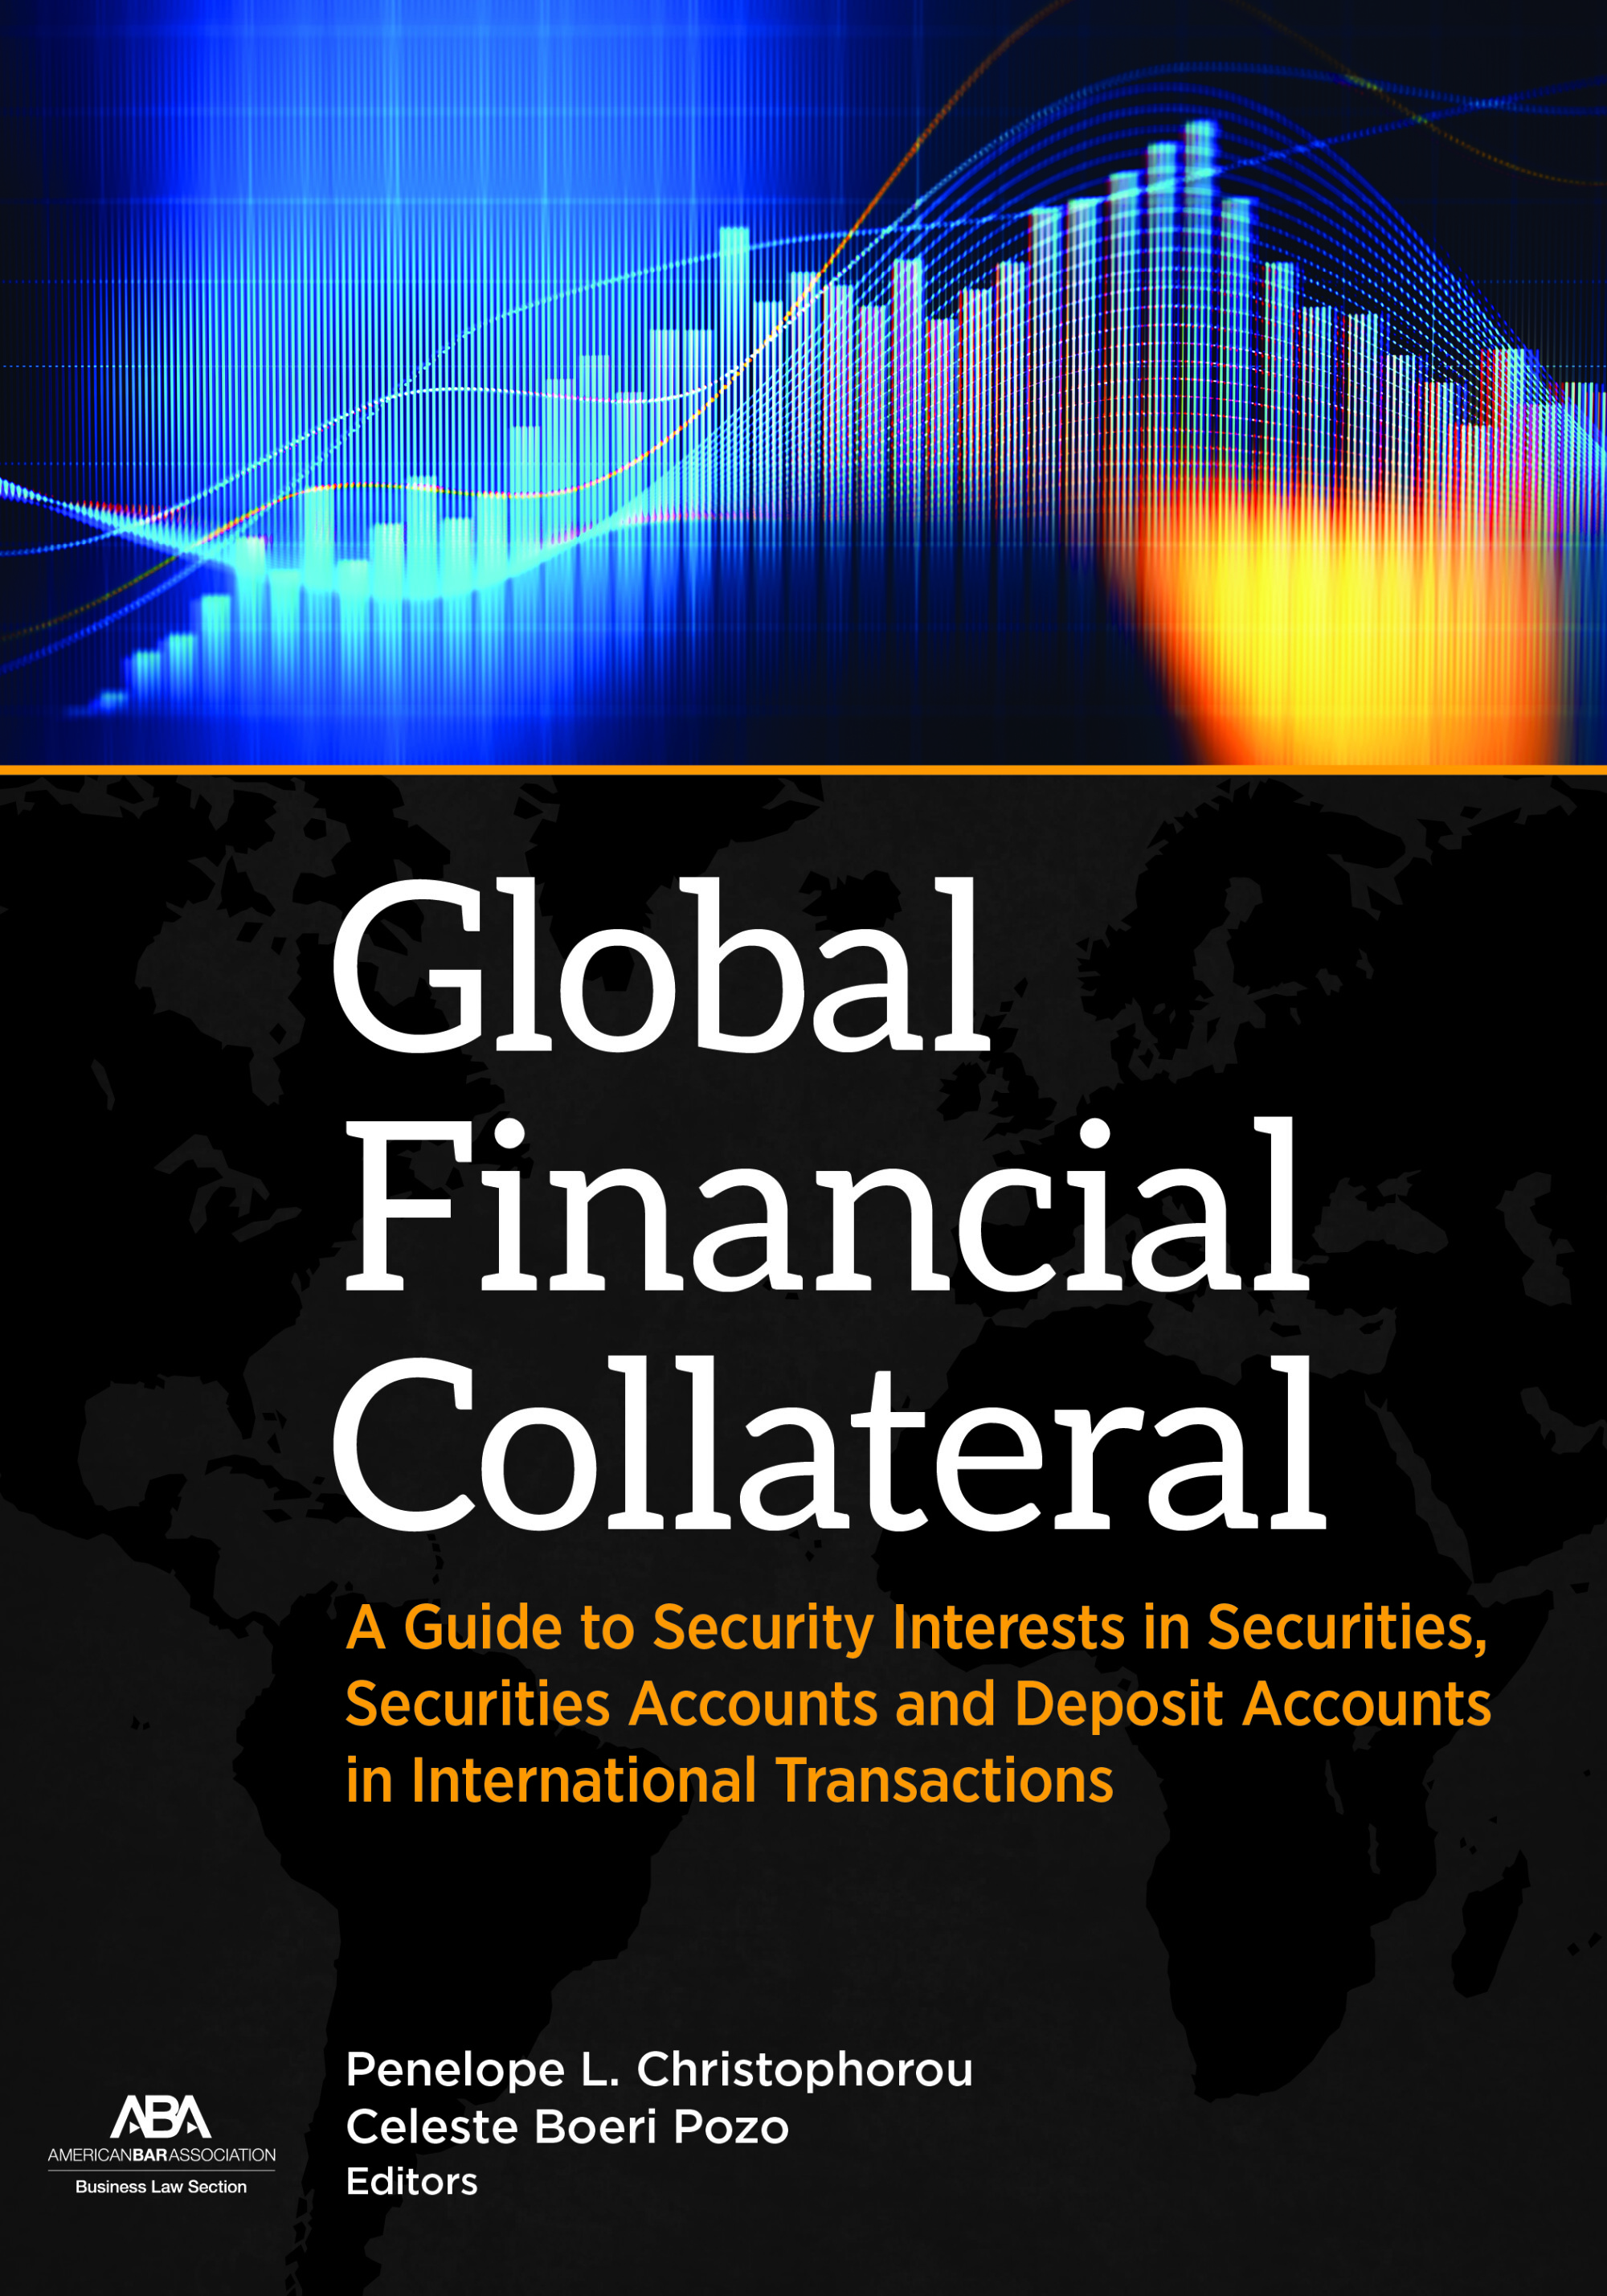 Book Cover: ABA Global Financial Collateral